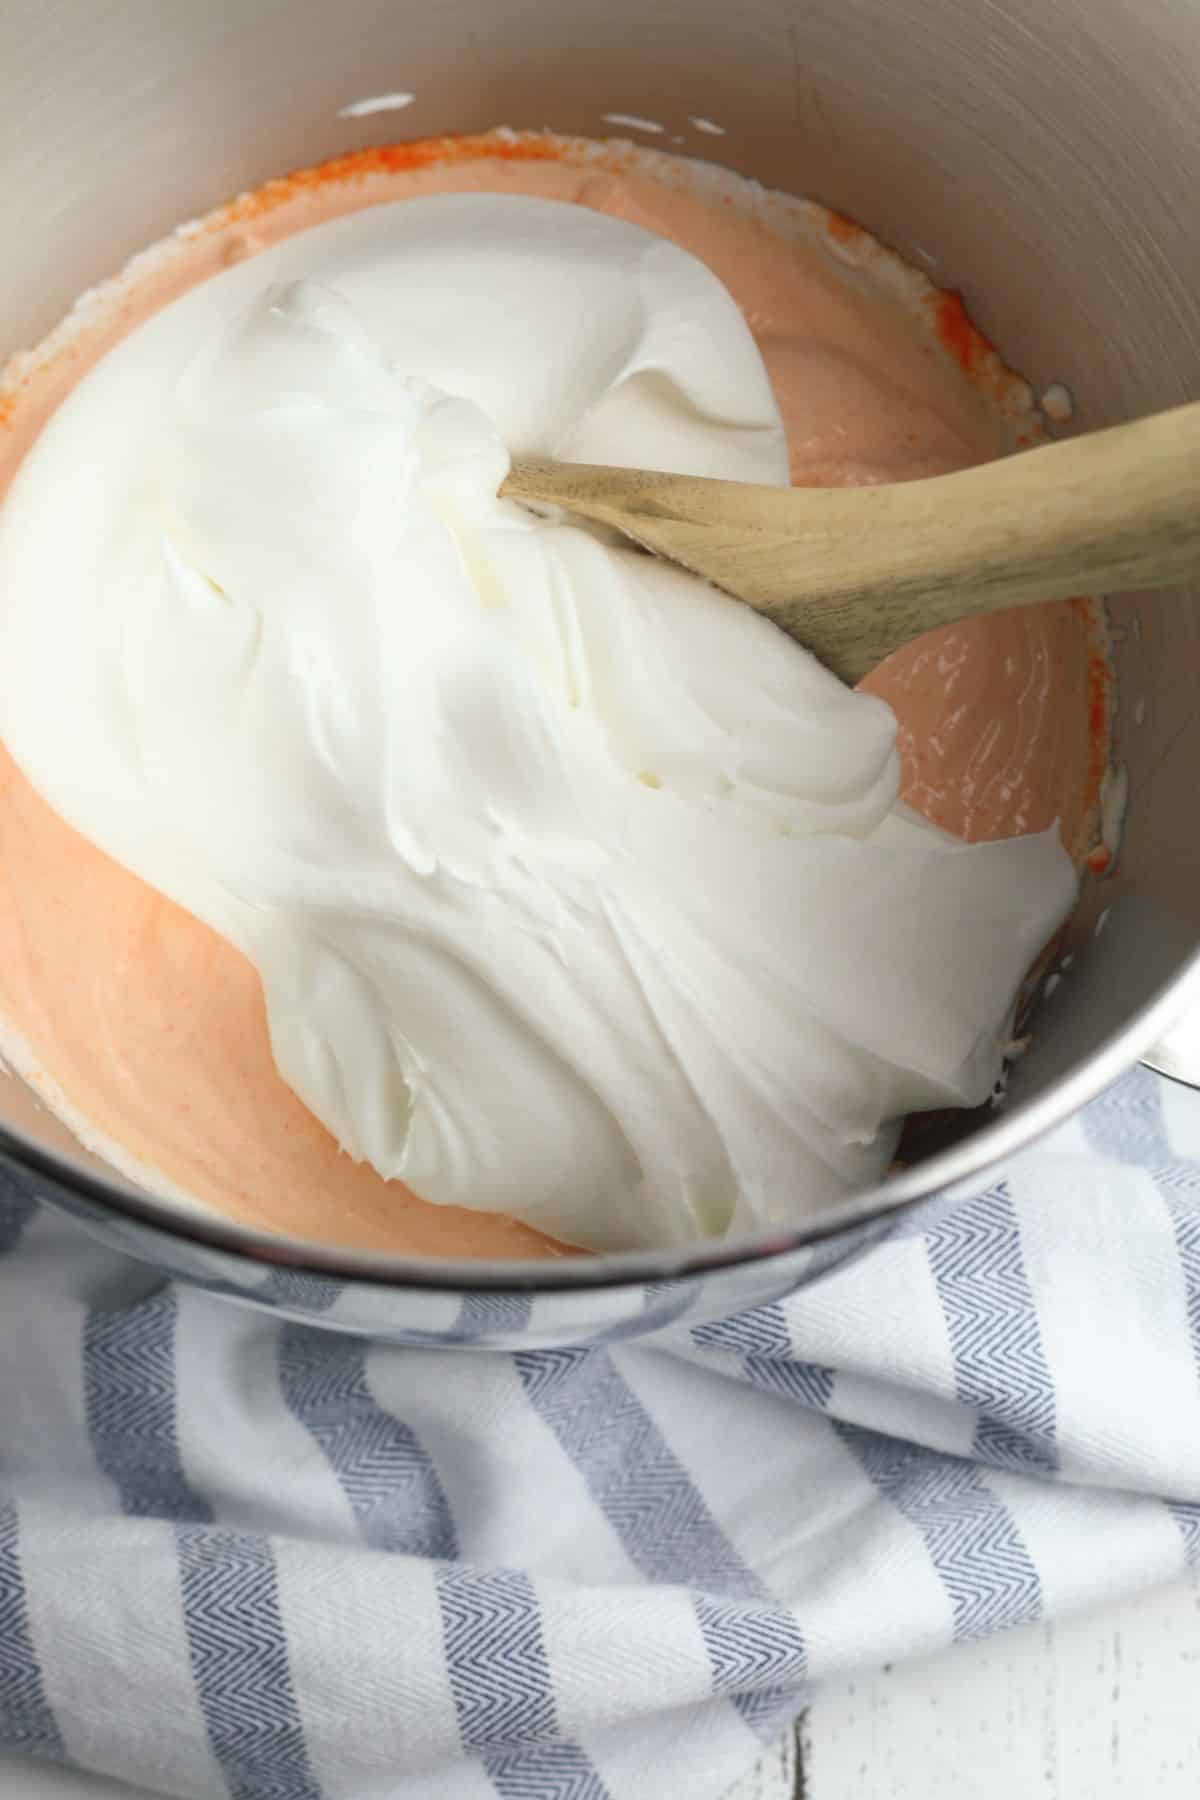 orange jello powder, whipped topping and Greek yogurt in a metal mixing bowl with a wooden spoon.